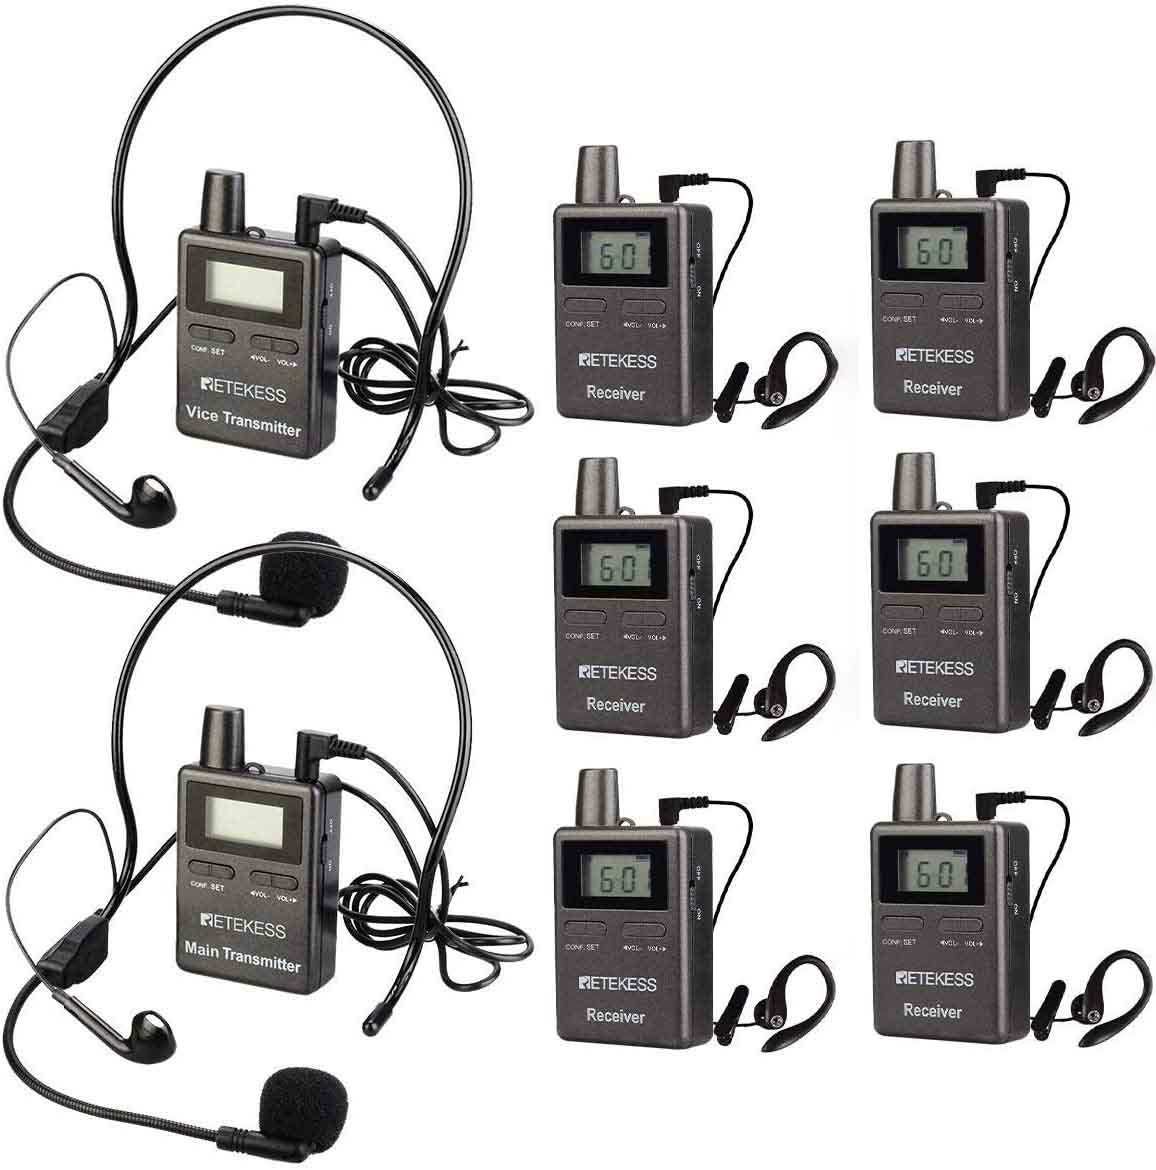 1 Main Transmitter and 1 Vice Transmitter Retekess TT105 Tour Guide System Wireless Two Way Transmitters for Traveling Museum Visit Conference 